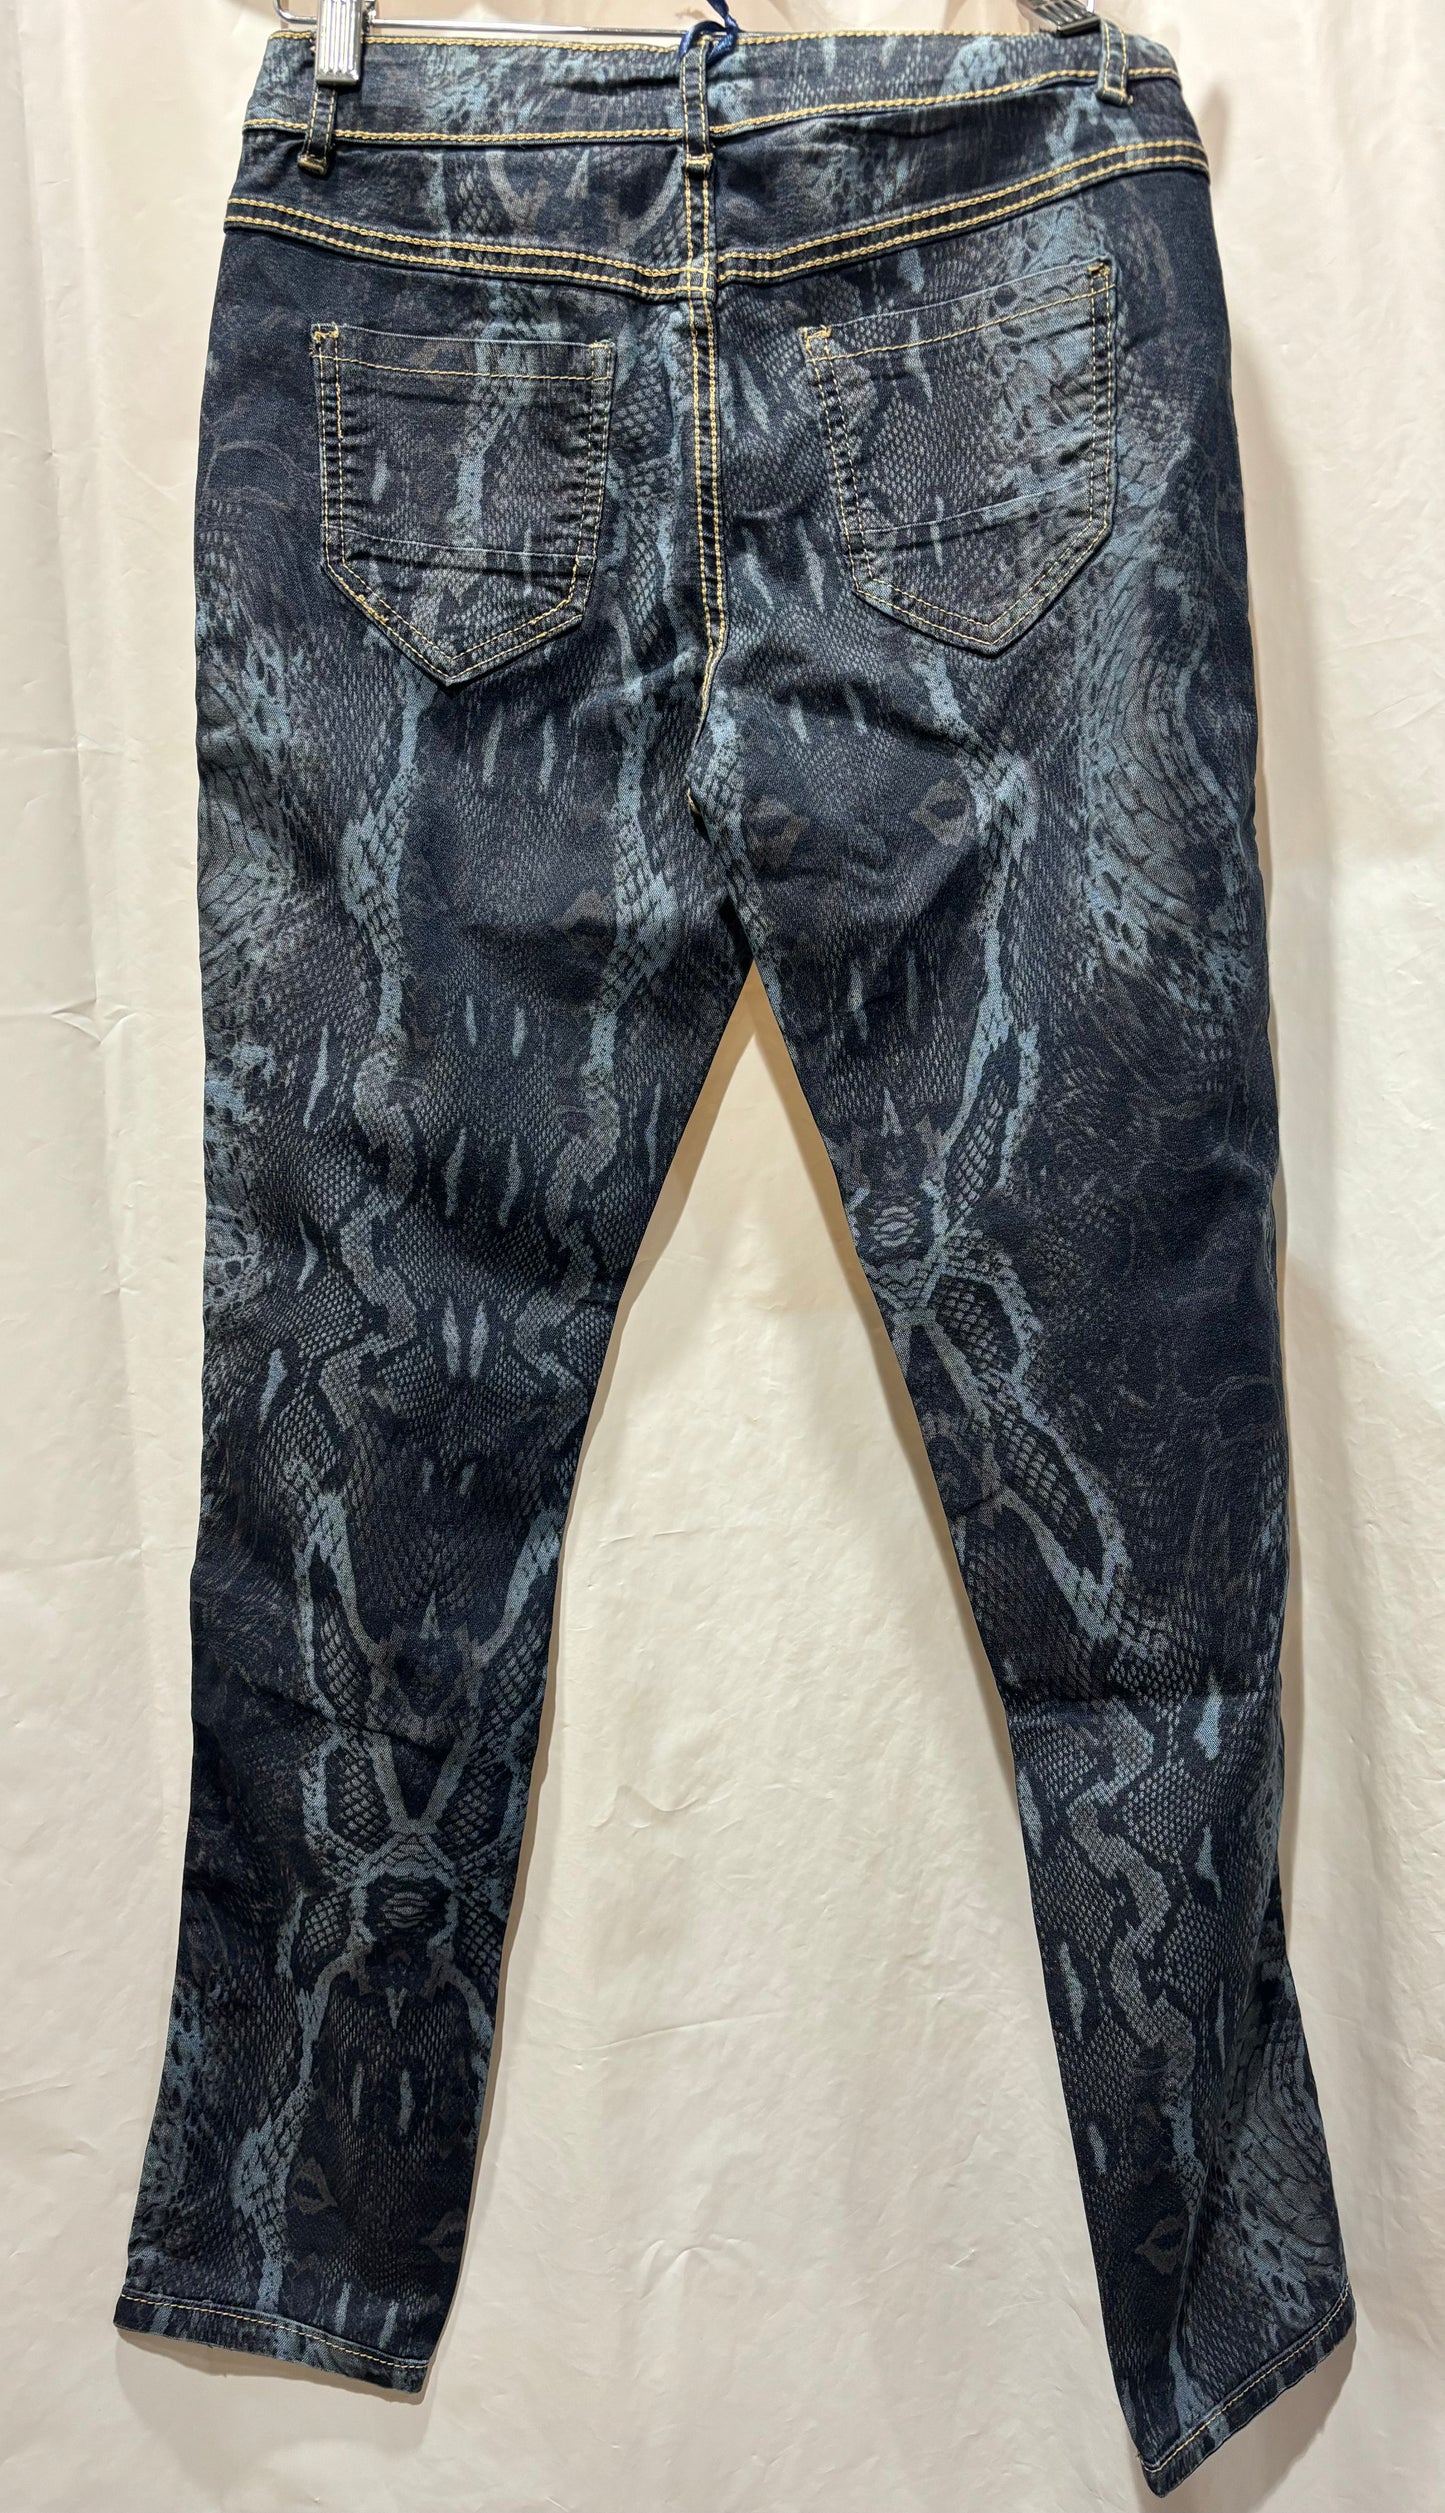 Reptile Design and Solid Denim Side Reversible Jeans